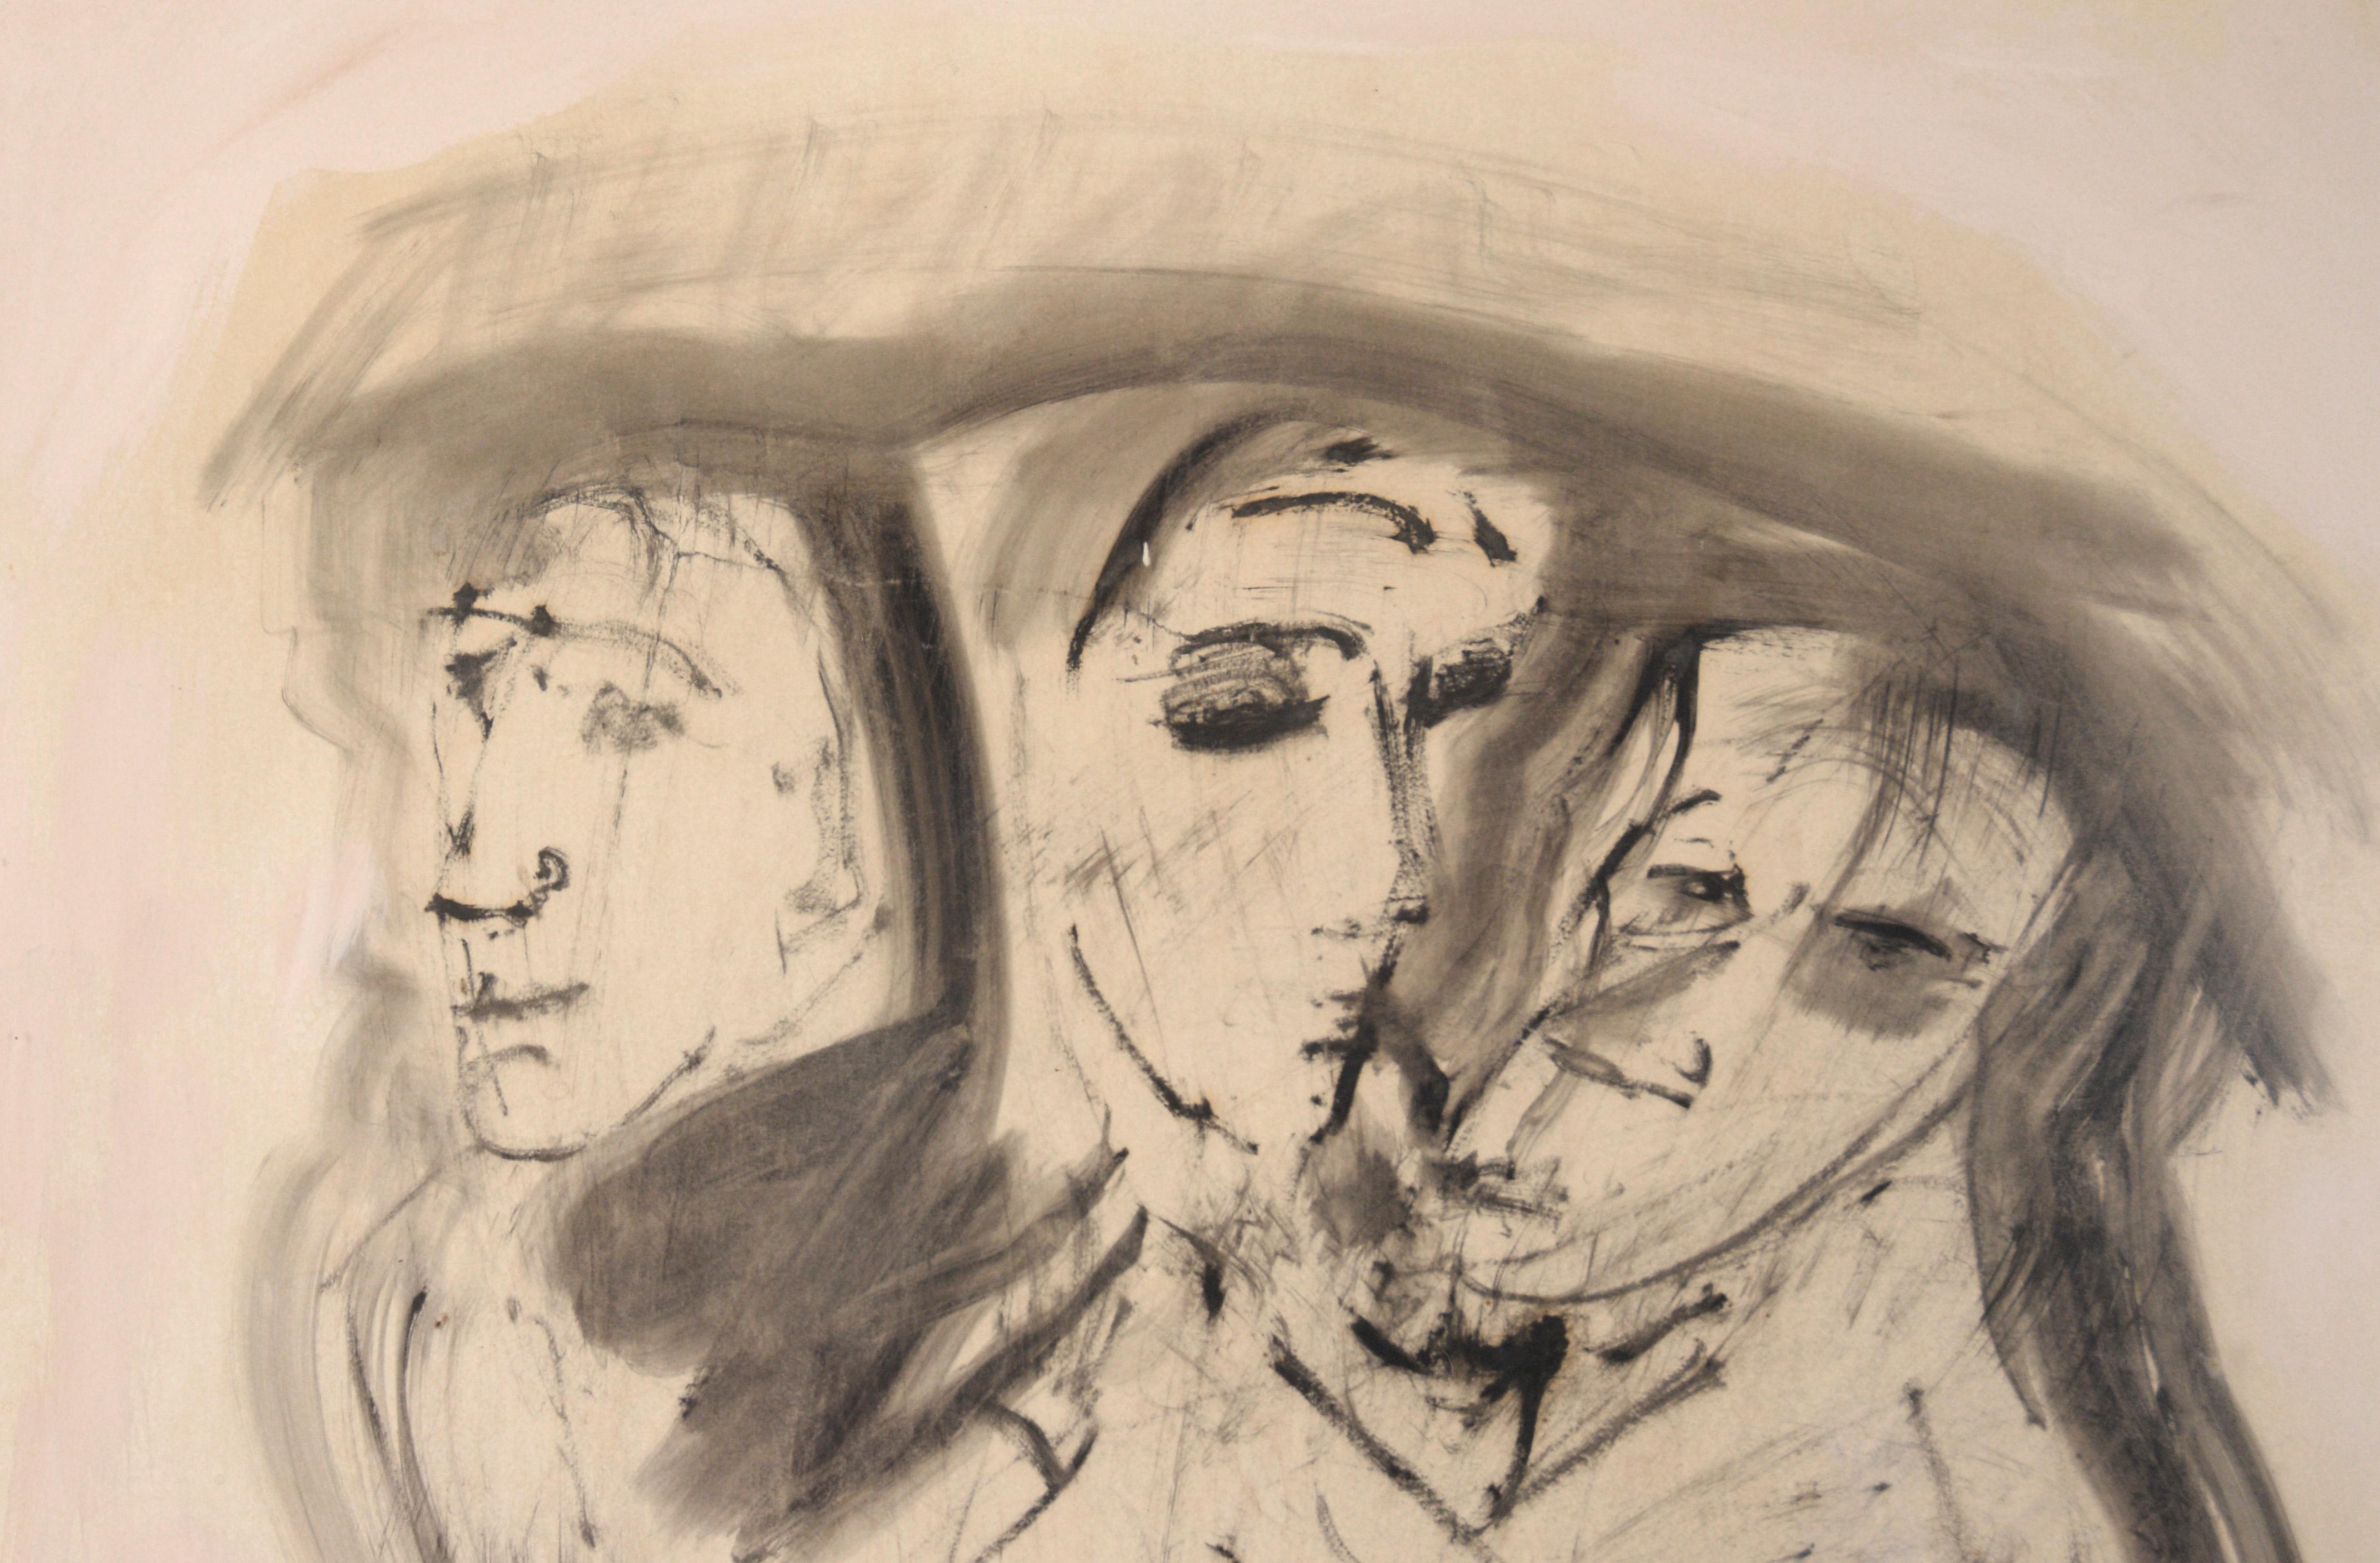 Three Figures - Black and White Illustration in Ink on Paper For Sale 3